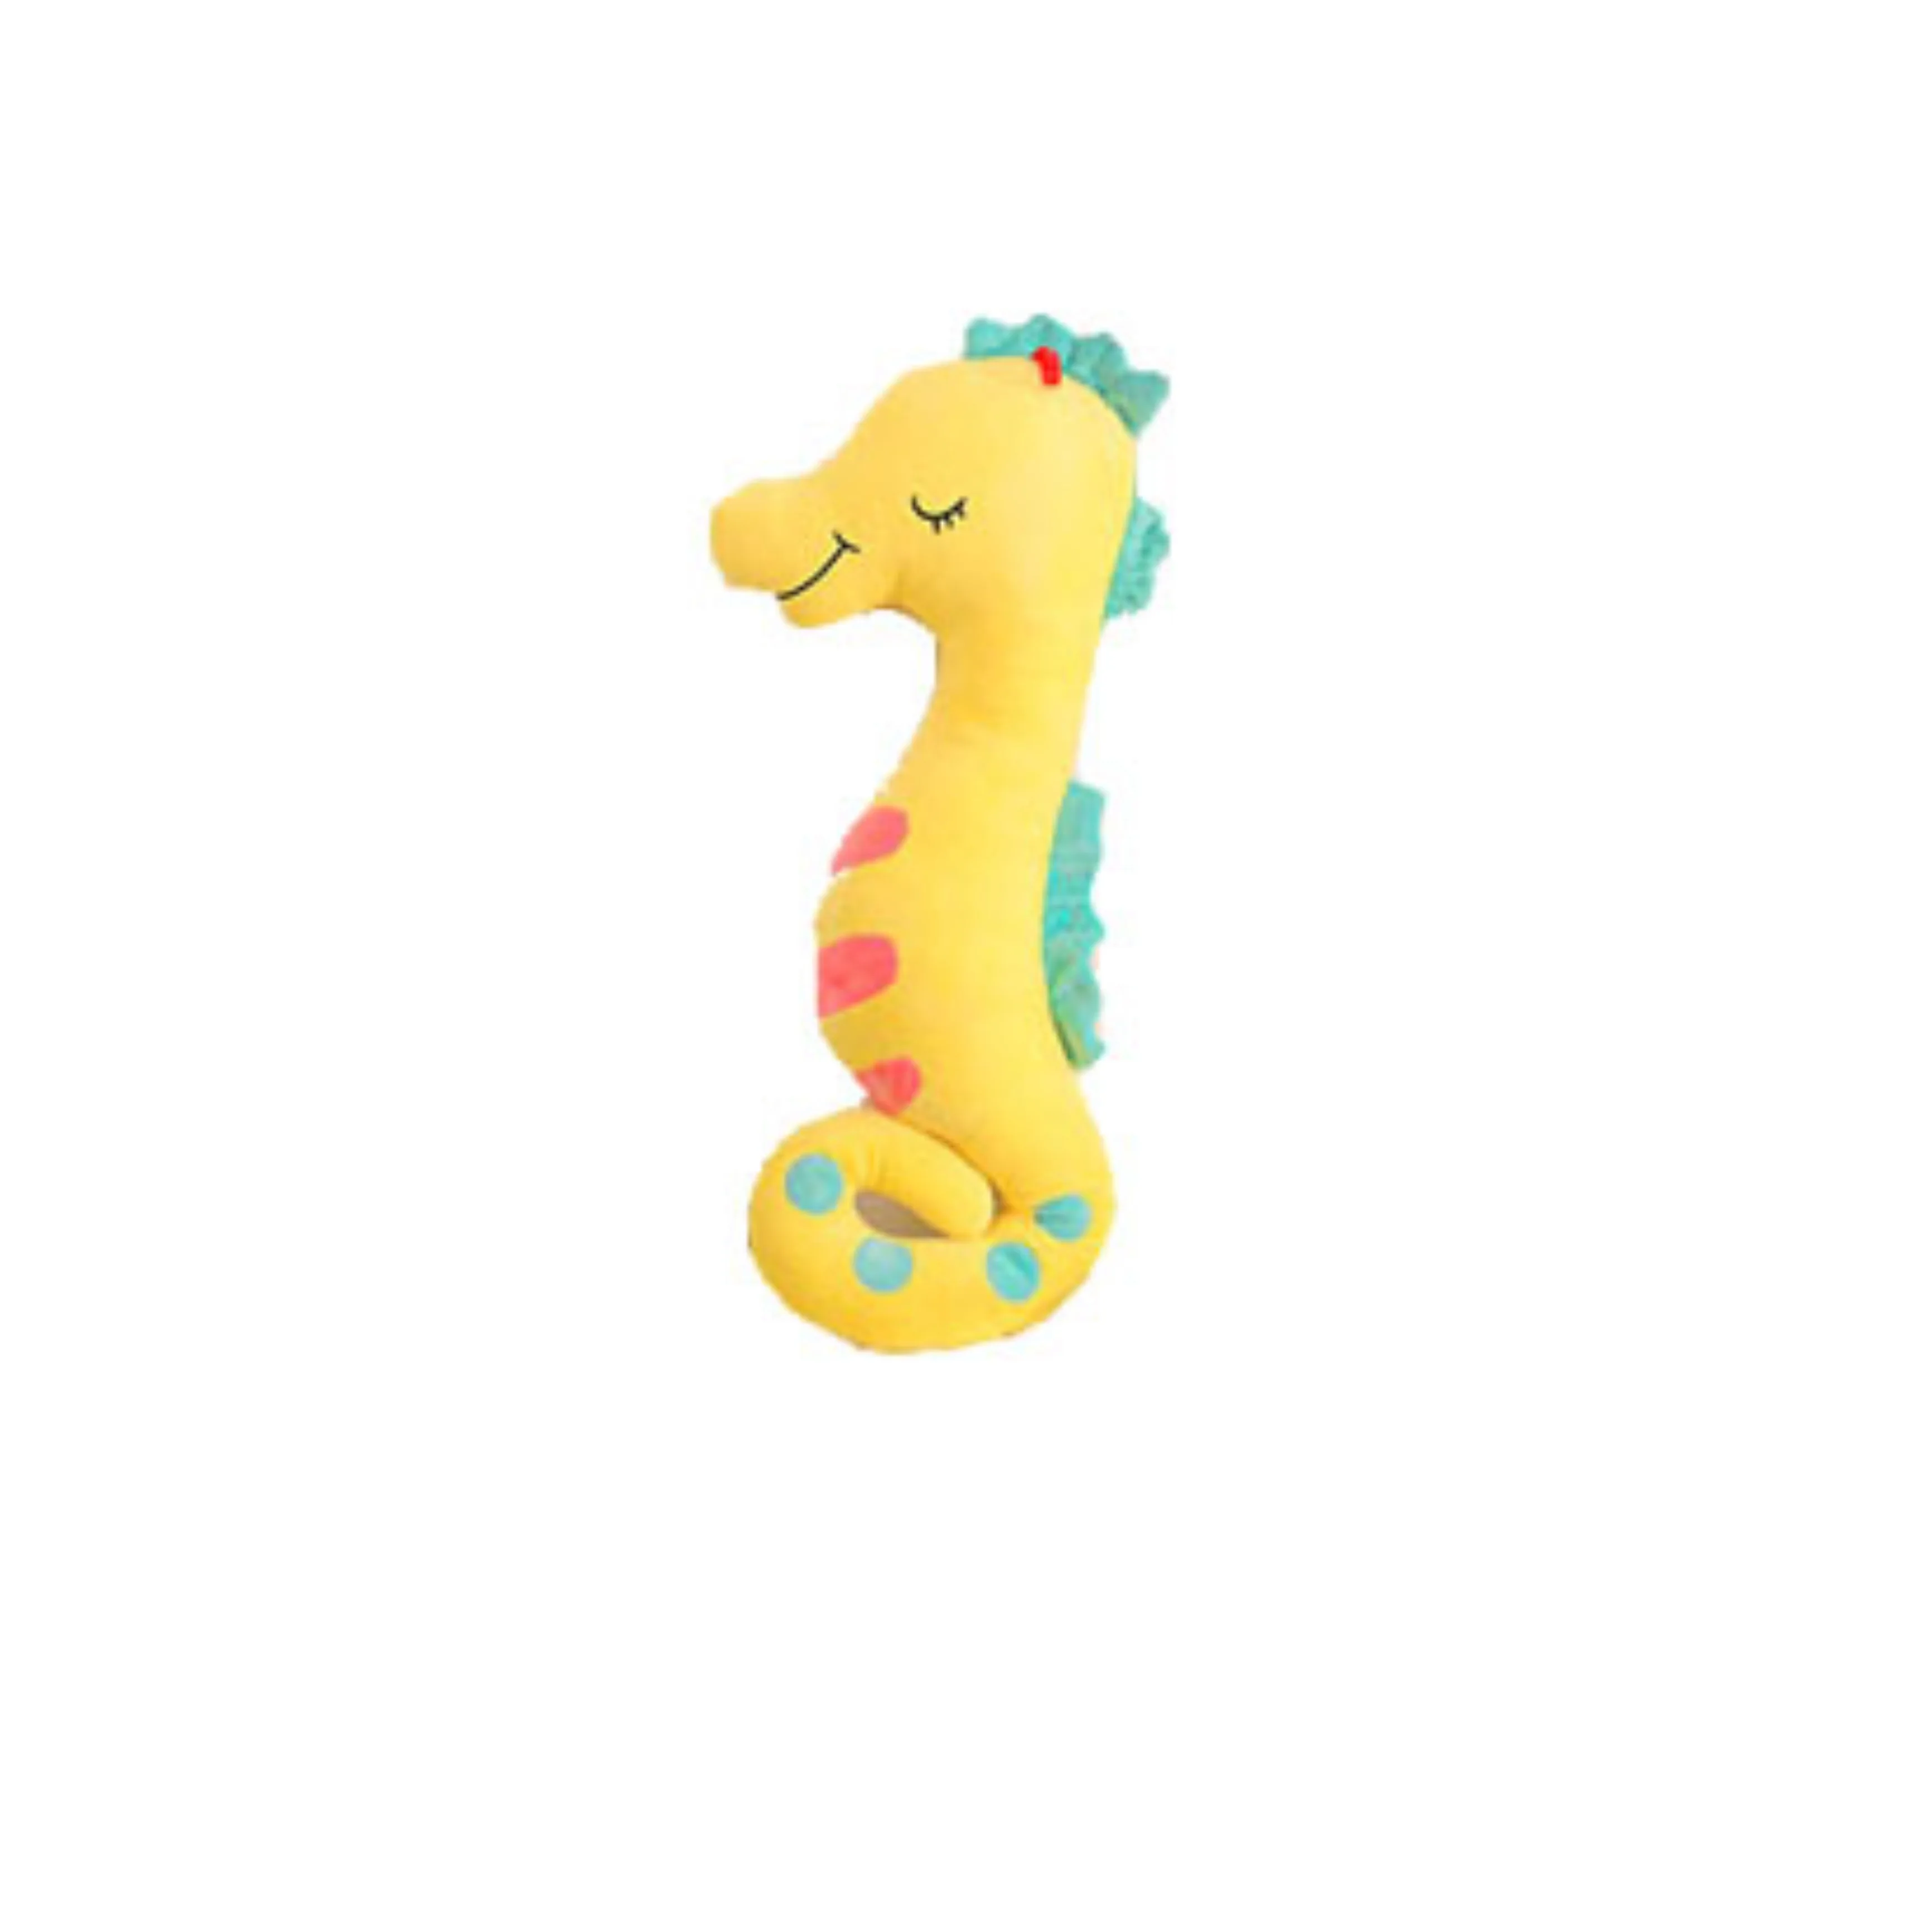 Large Cheap Soft Plush Toy Order Online Sea Horse Stuffed Animals - Buy  Soft Plush Toy,Sea Horse Stuffed Animals,Custom Plush Sea Horse Toys  Product on 